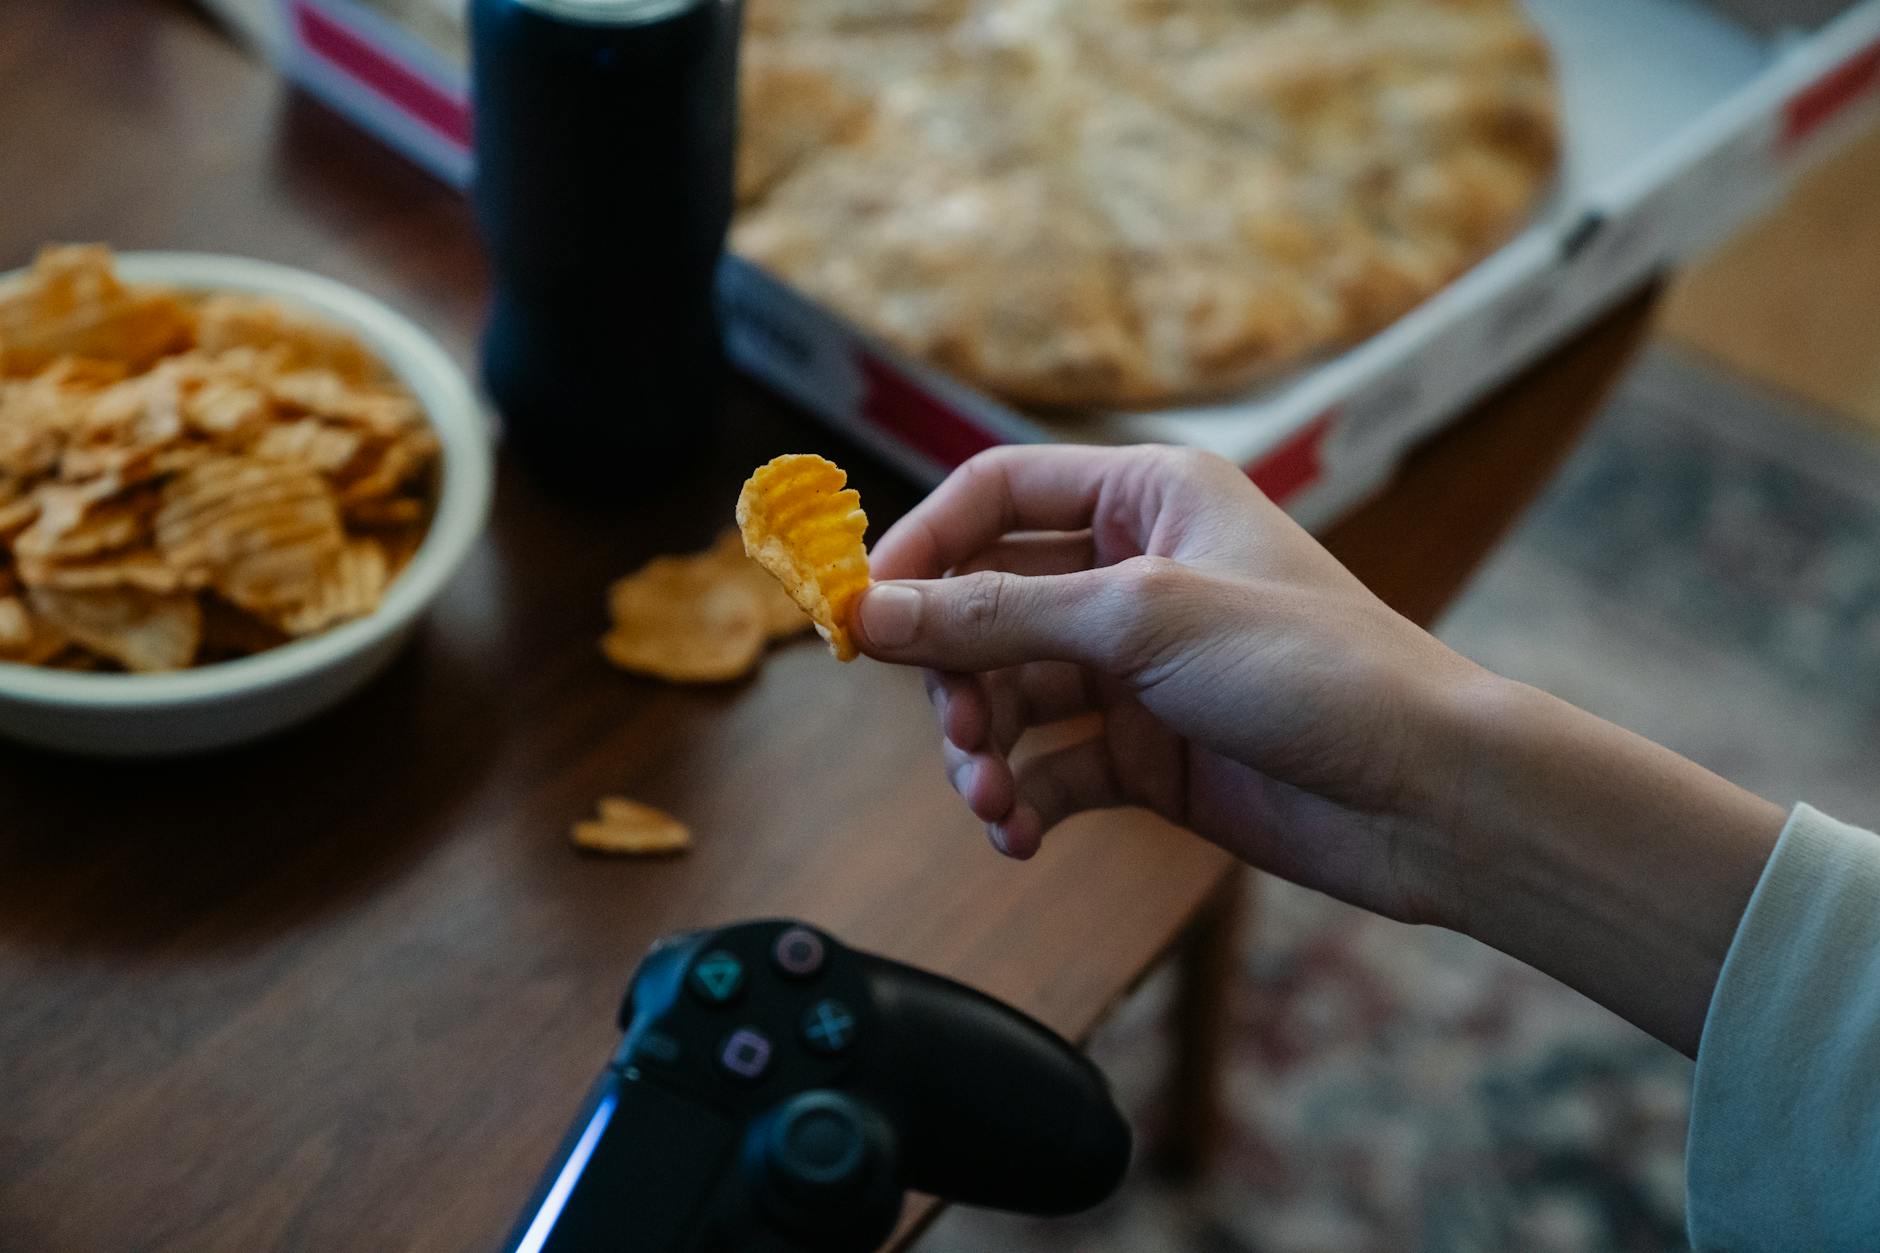 Crop gamer with potato chip and joystick in room